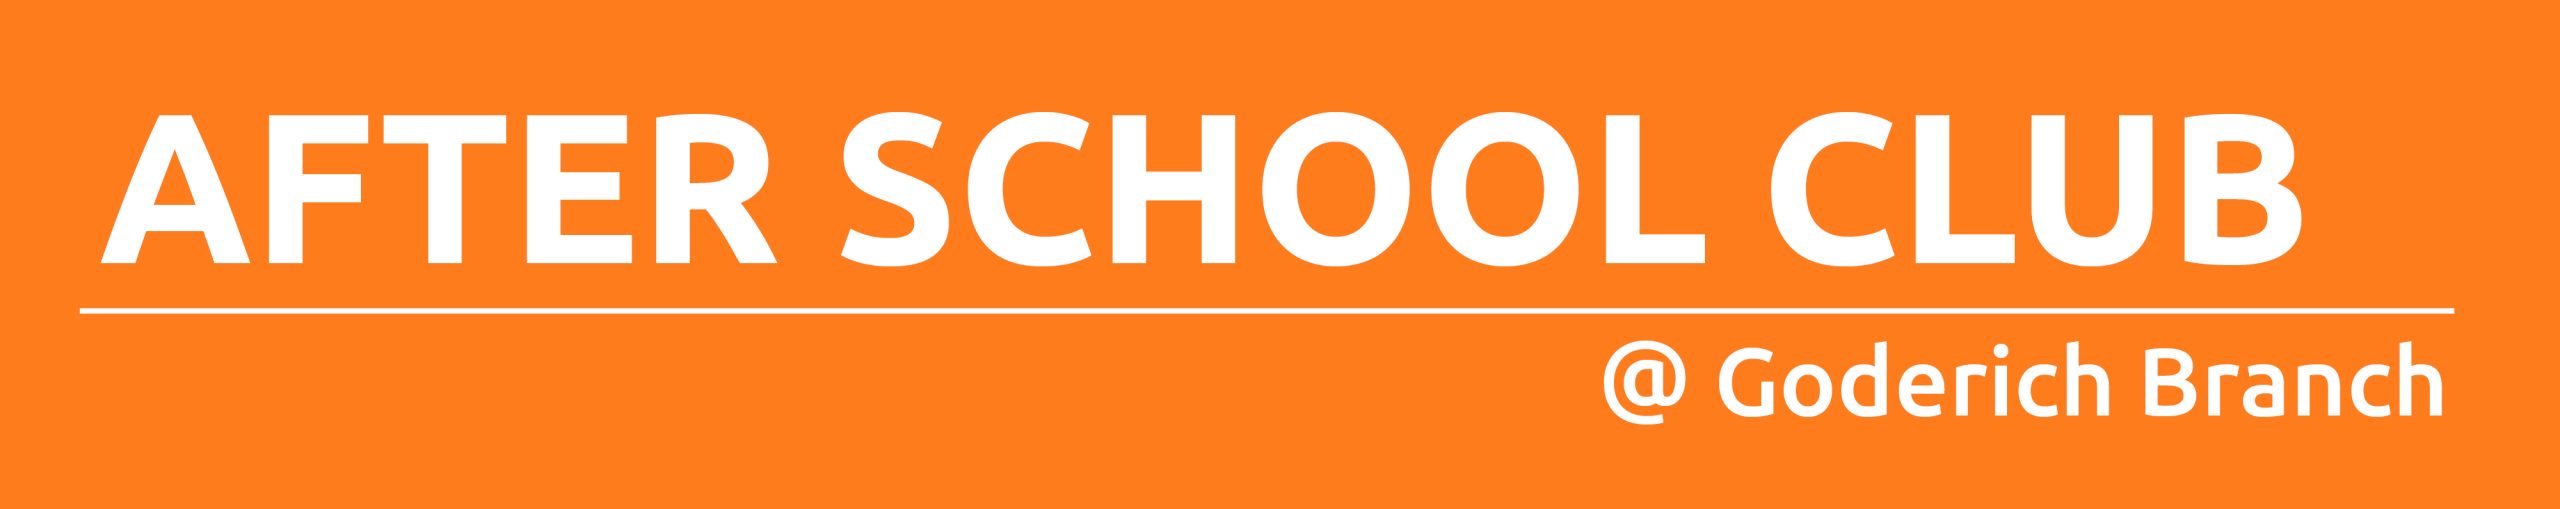 Orange rectangle with text promoting After School Club at Goderich Branch